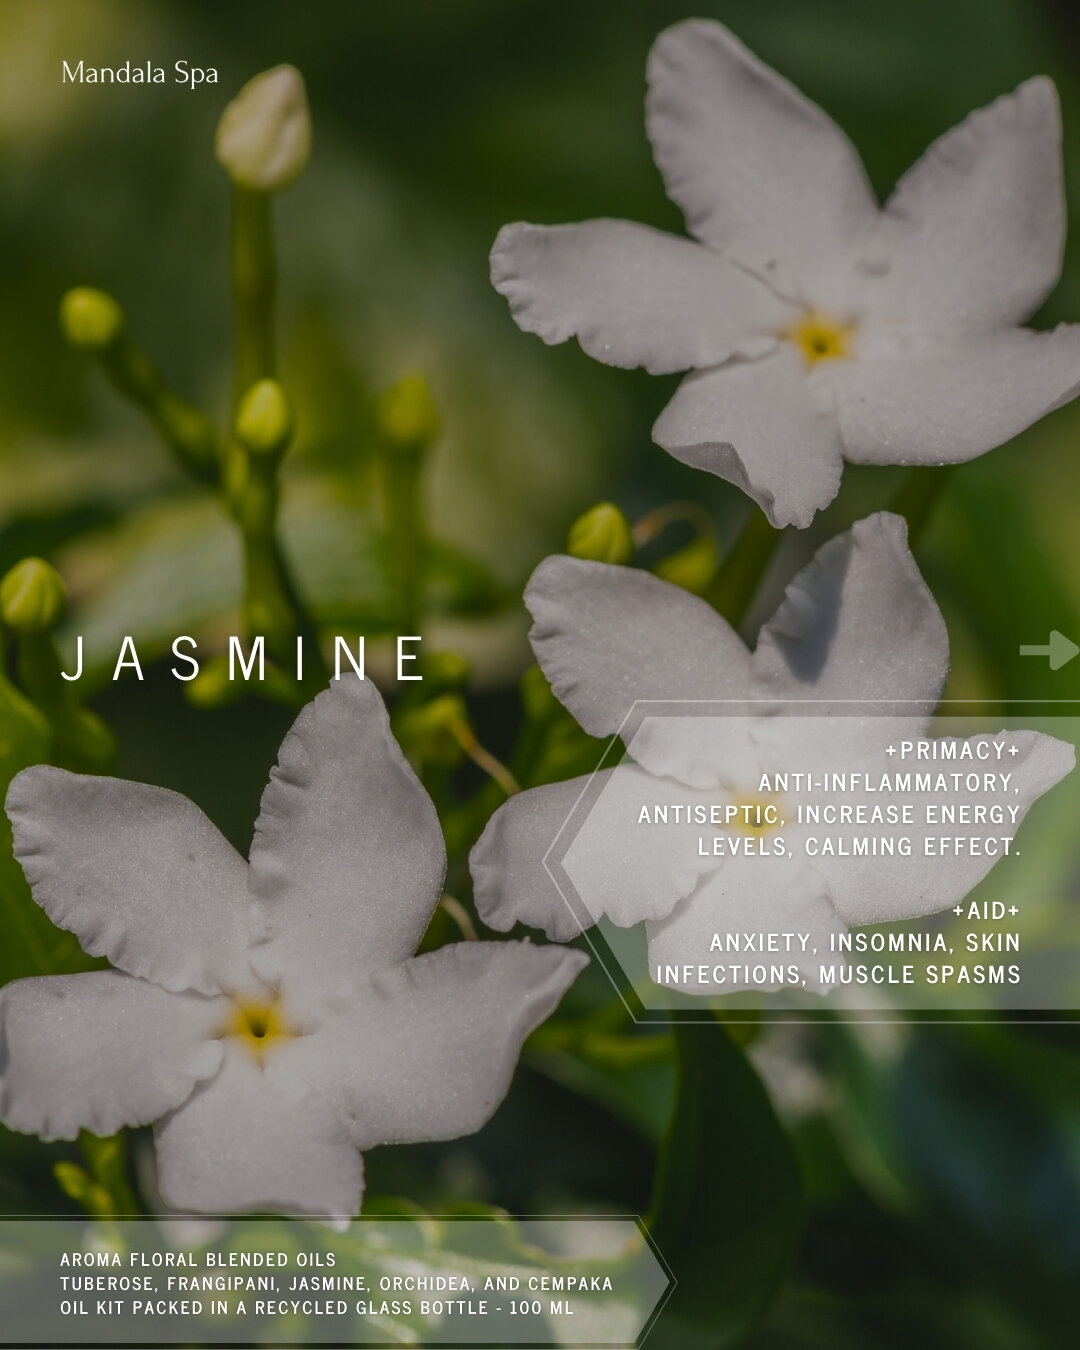 Brighten your day and your complexion with the mood-boosting power of jasmine flower oil! 🌺✨ Let its natural goodness elevate your skincare routine and uplift your spirits.

Open 9 am to 8 pm daily
Call to book at +623619088888
Chat to book at +6281